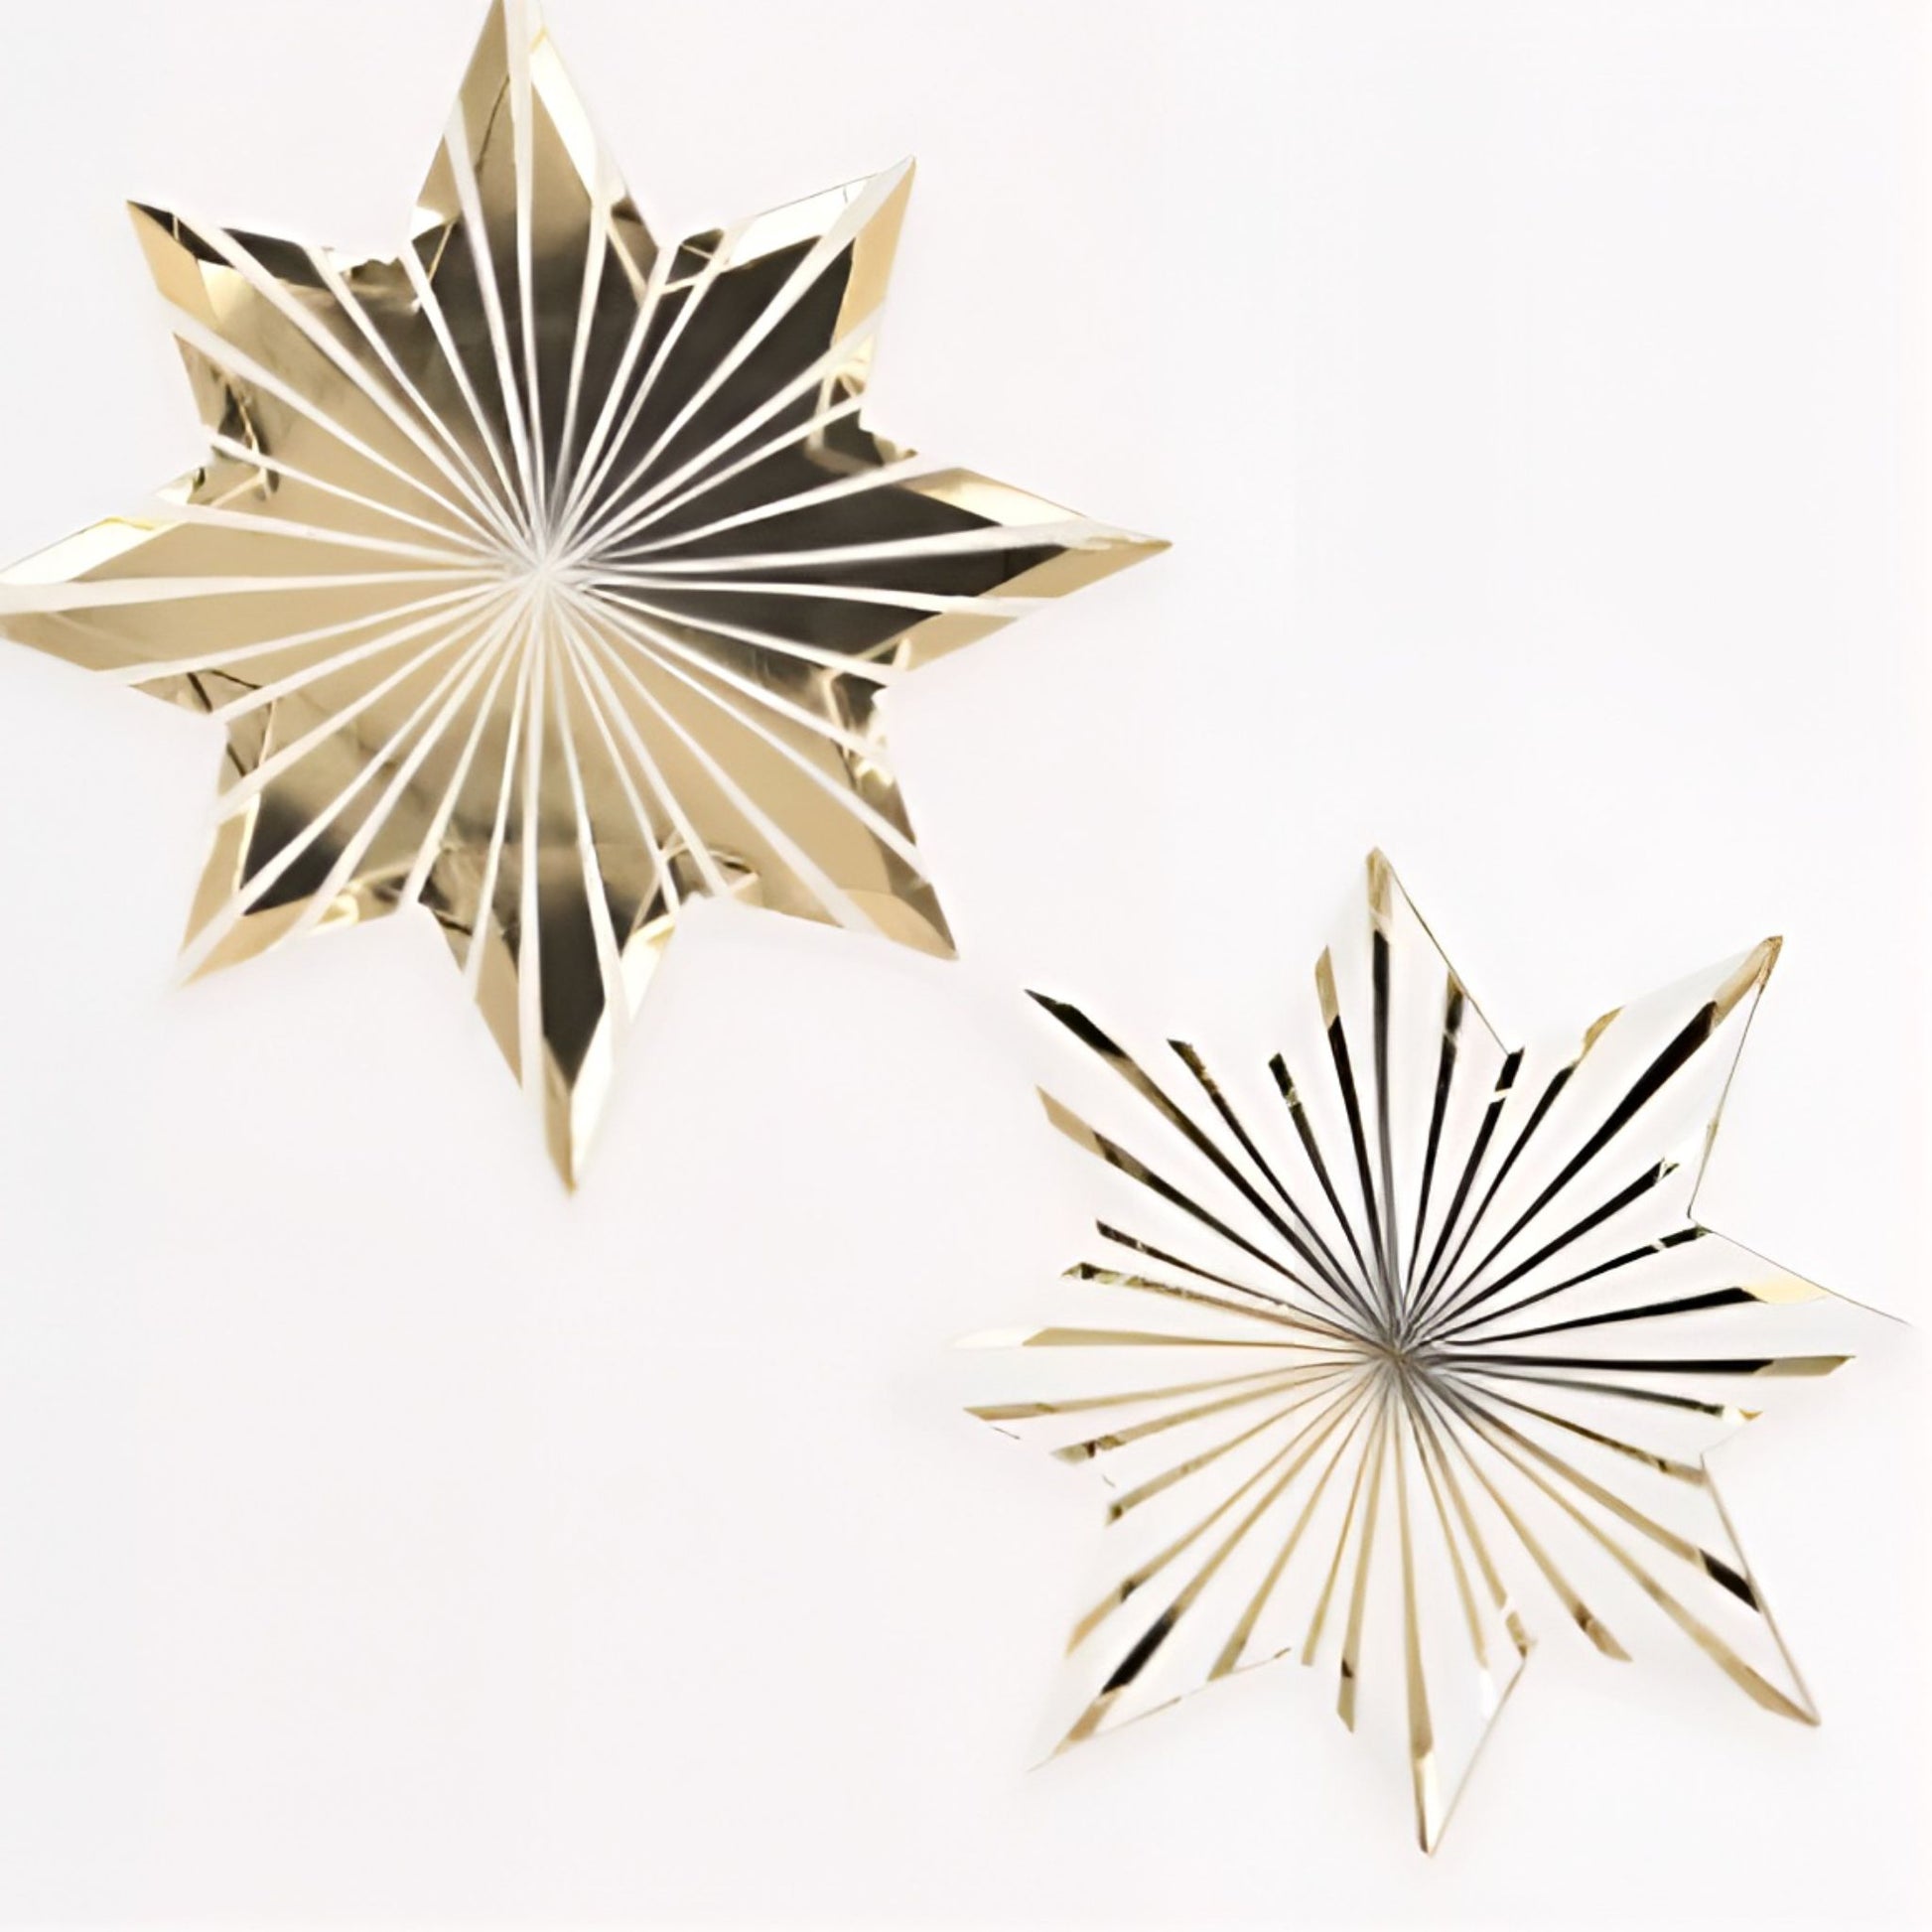 Striking Gold and white star burst shaped party plates